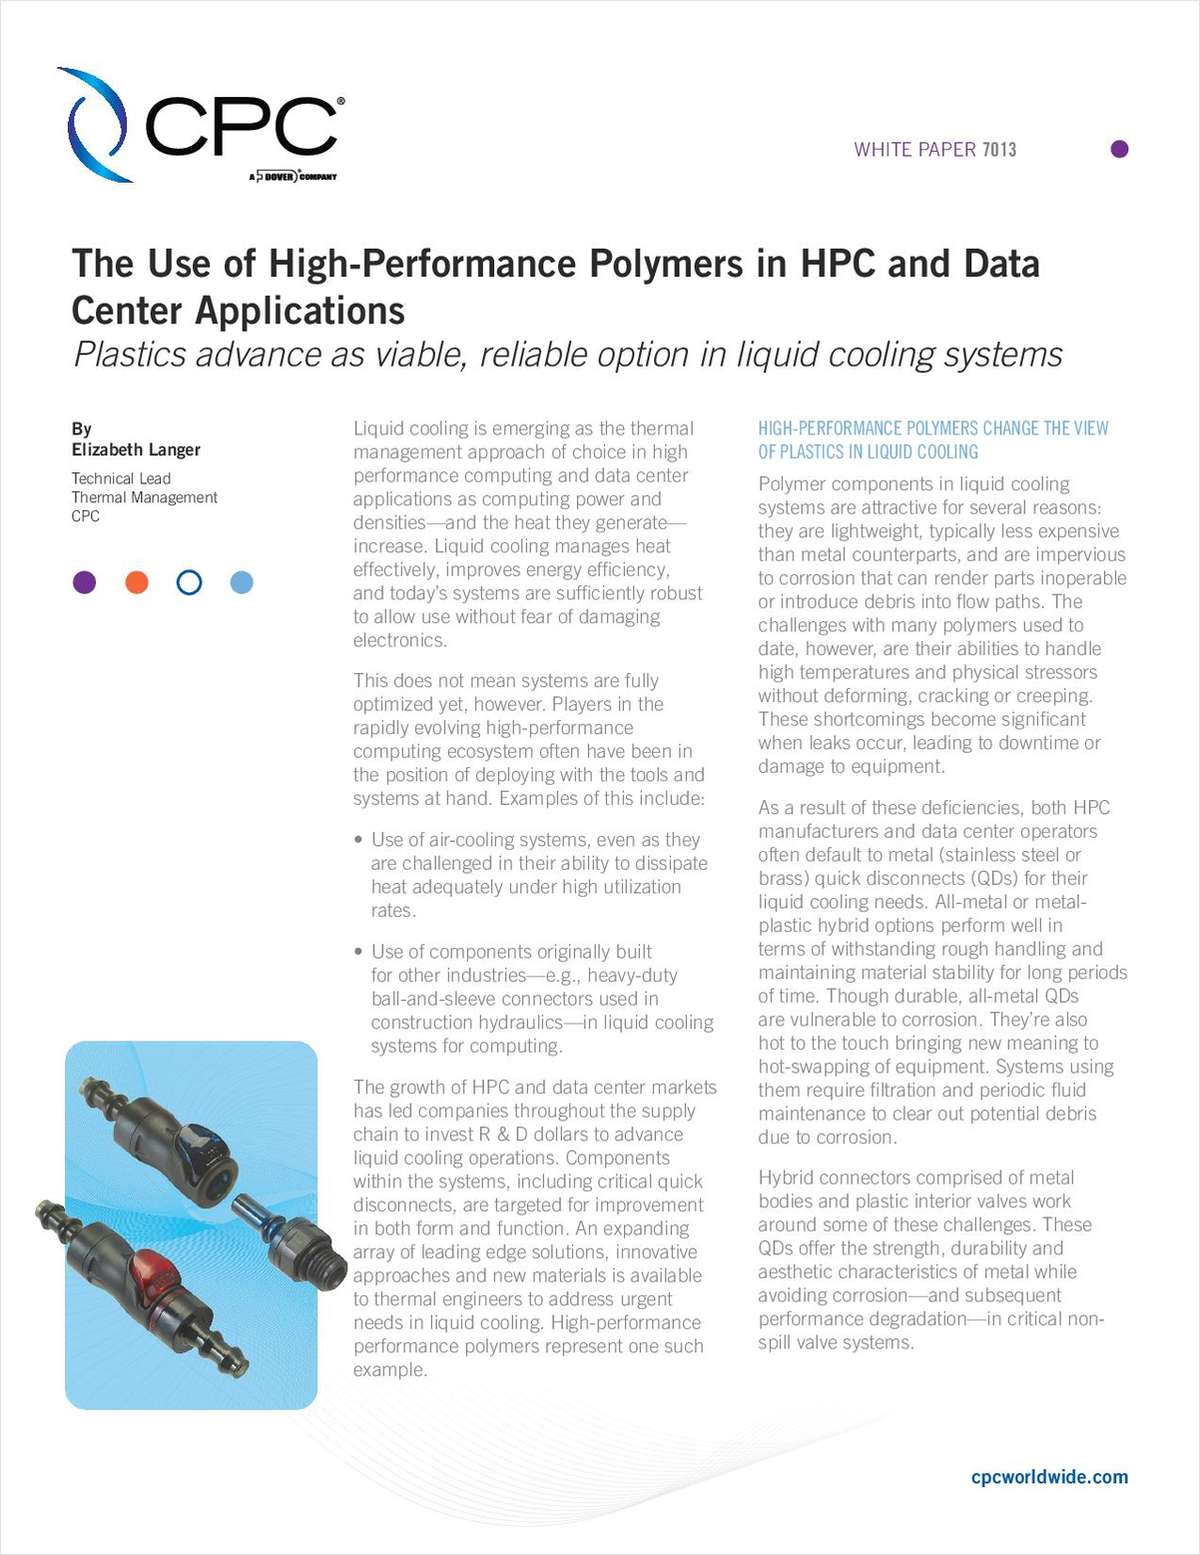 The Use of High-Performance Polymers in HPC and Data Center Applications